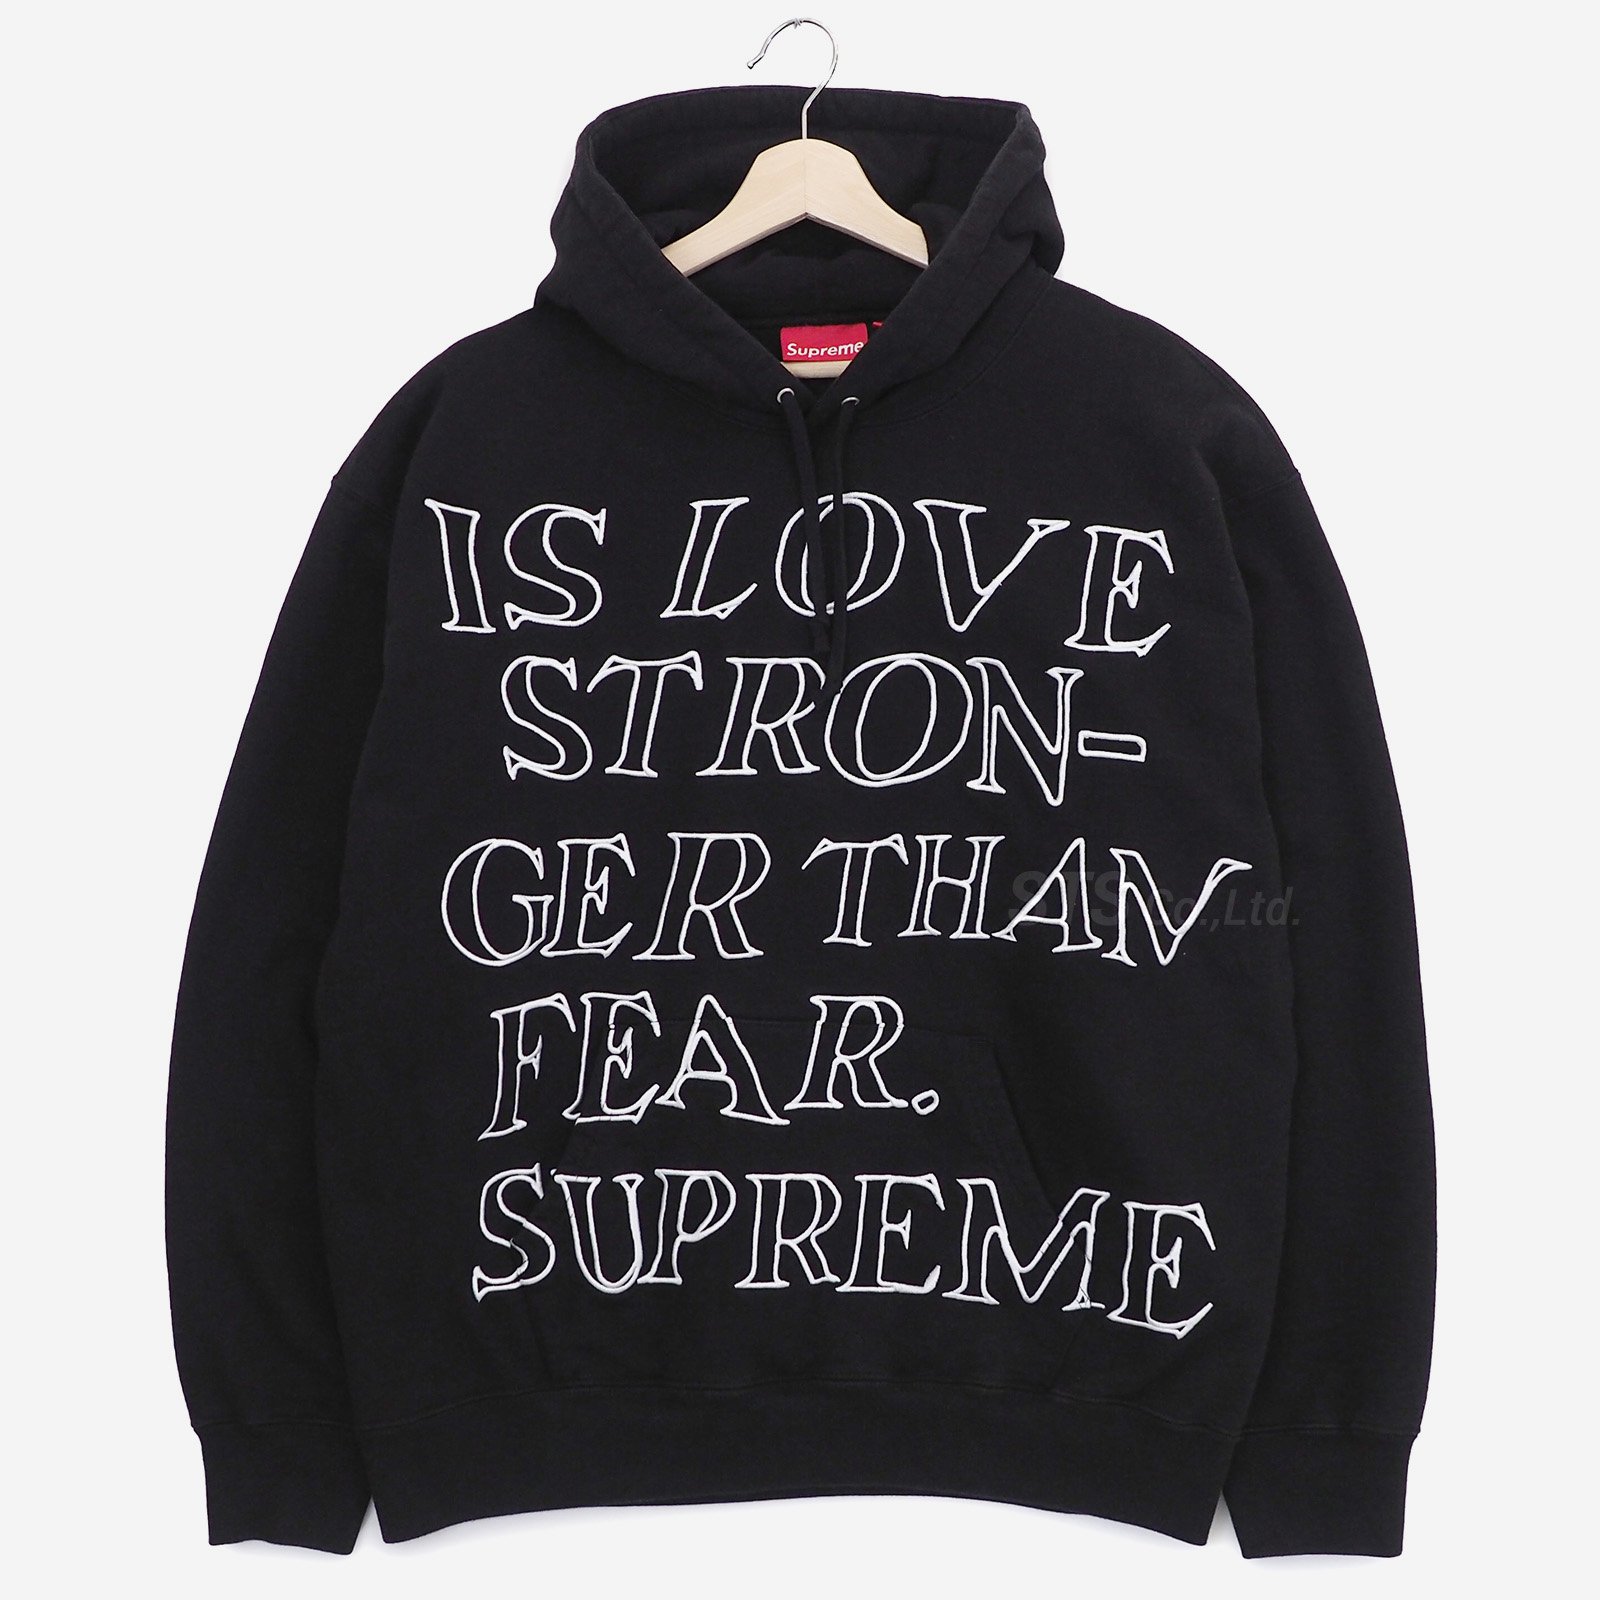 M 23ss Supreme Stronger Than Fear Hooded